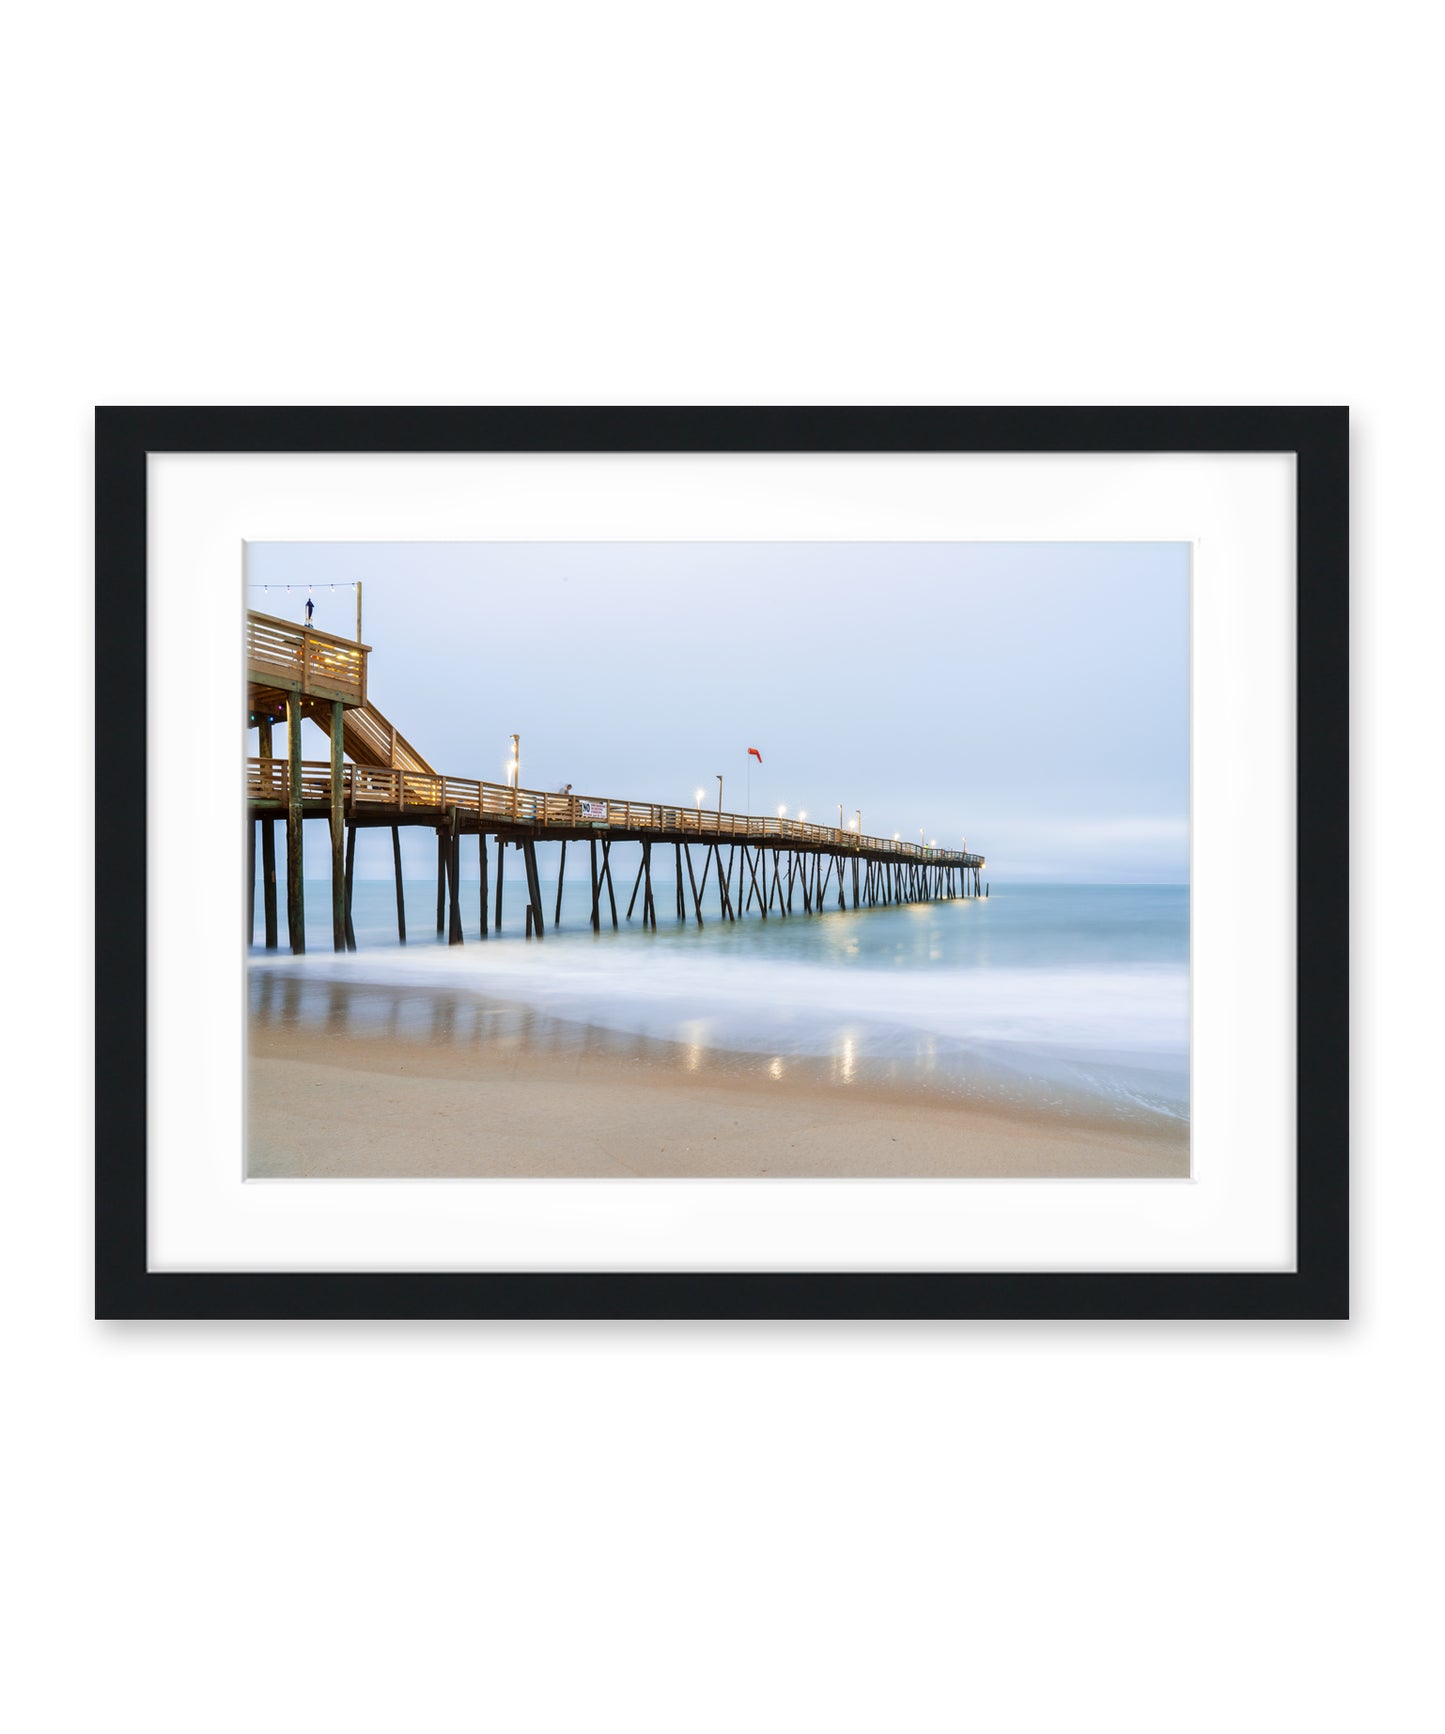 outer banks, avalon pier, blue beach wall art photograph by Wright and Roam, black Wood frame